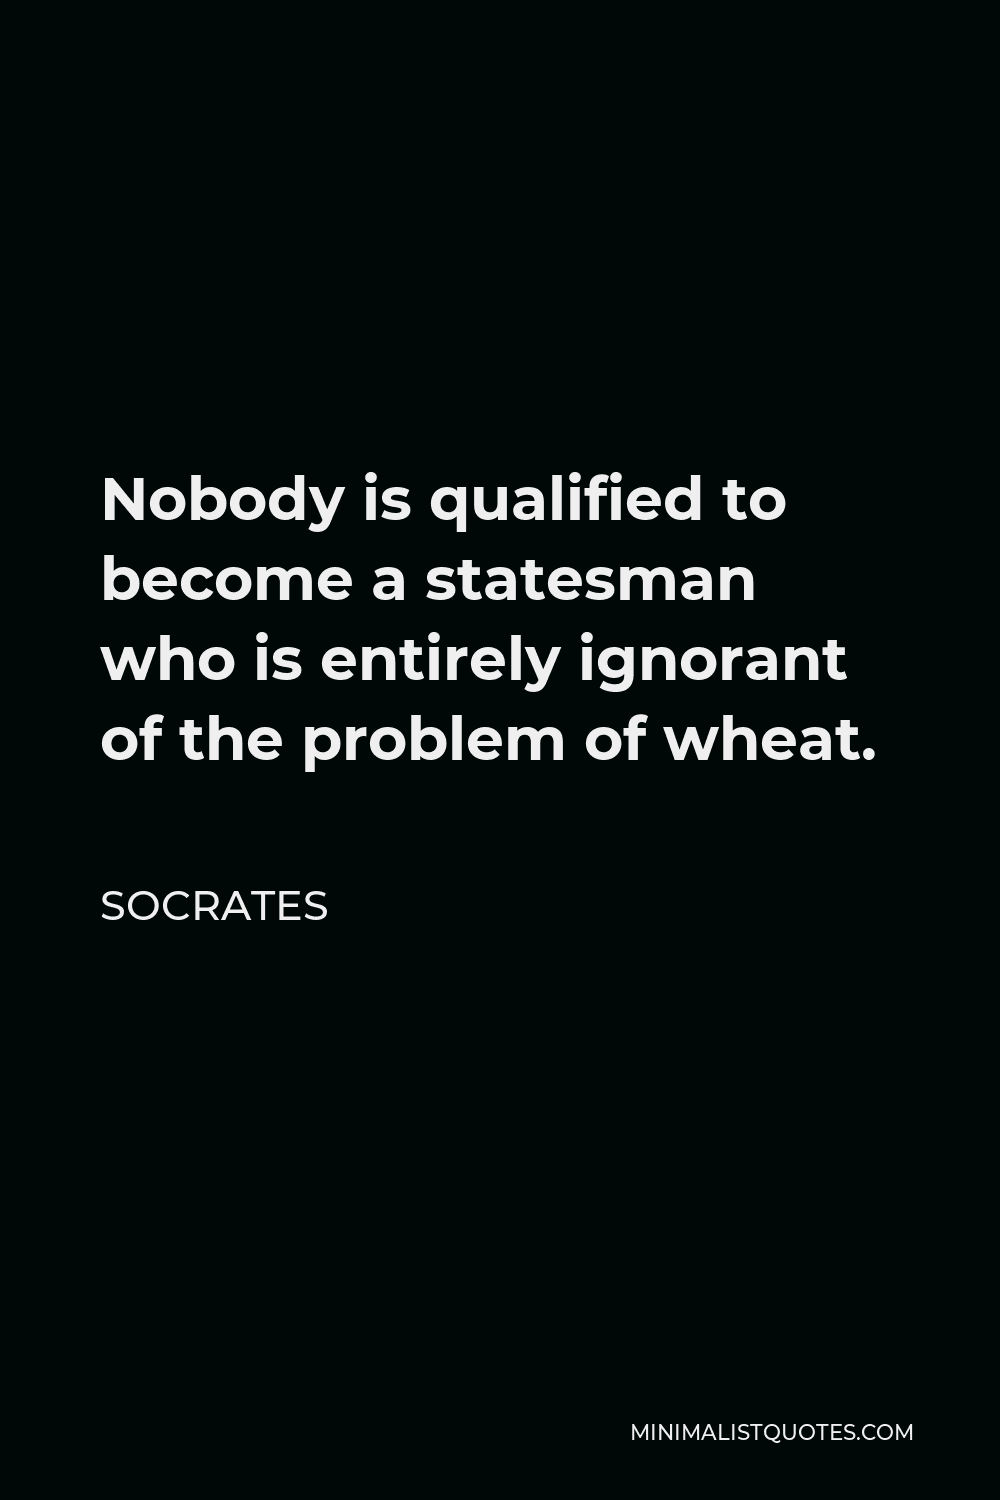 Socrates Quote - Nobody is qualified to become a statesman who is entirely ignorant of the problem of wheat.